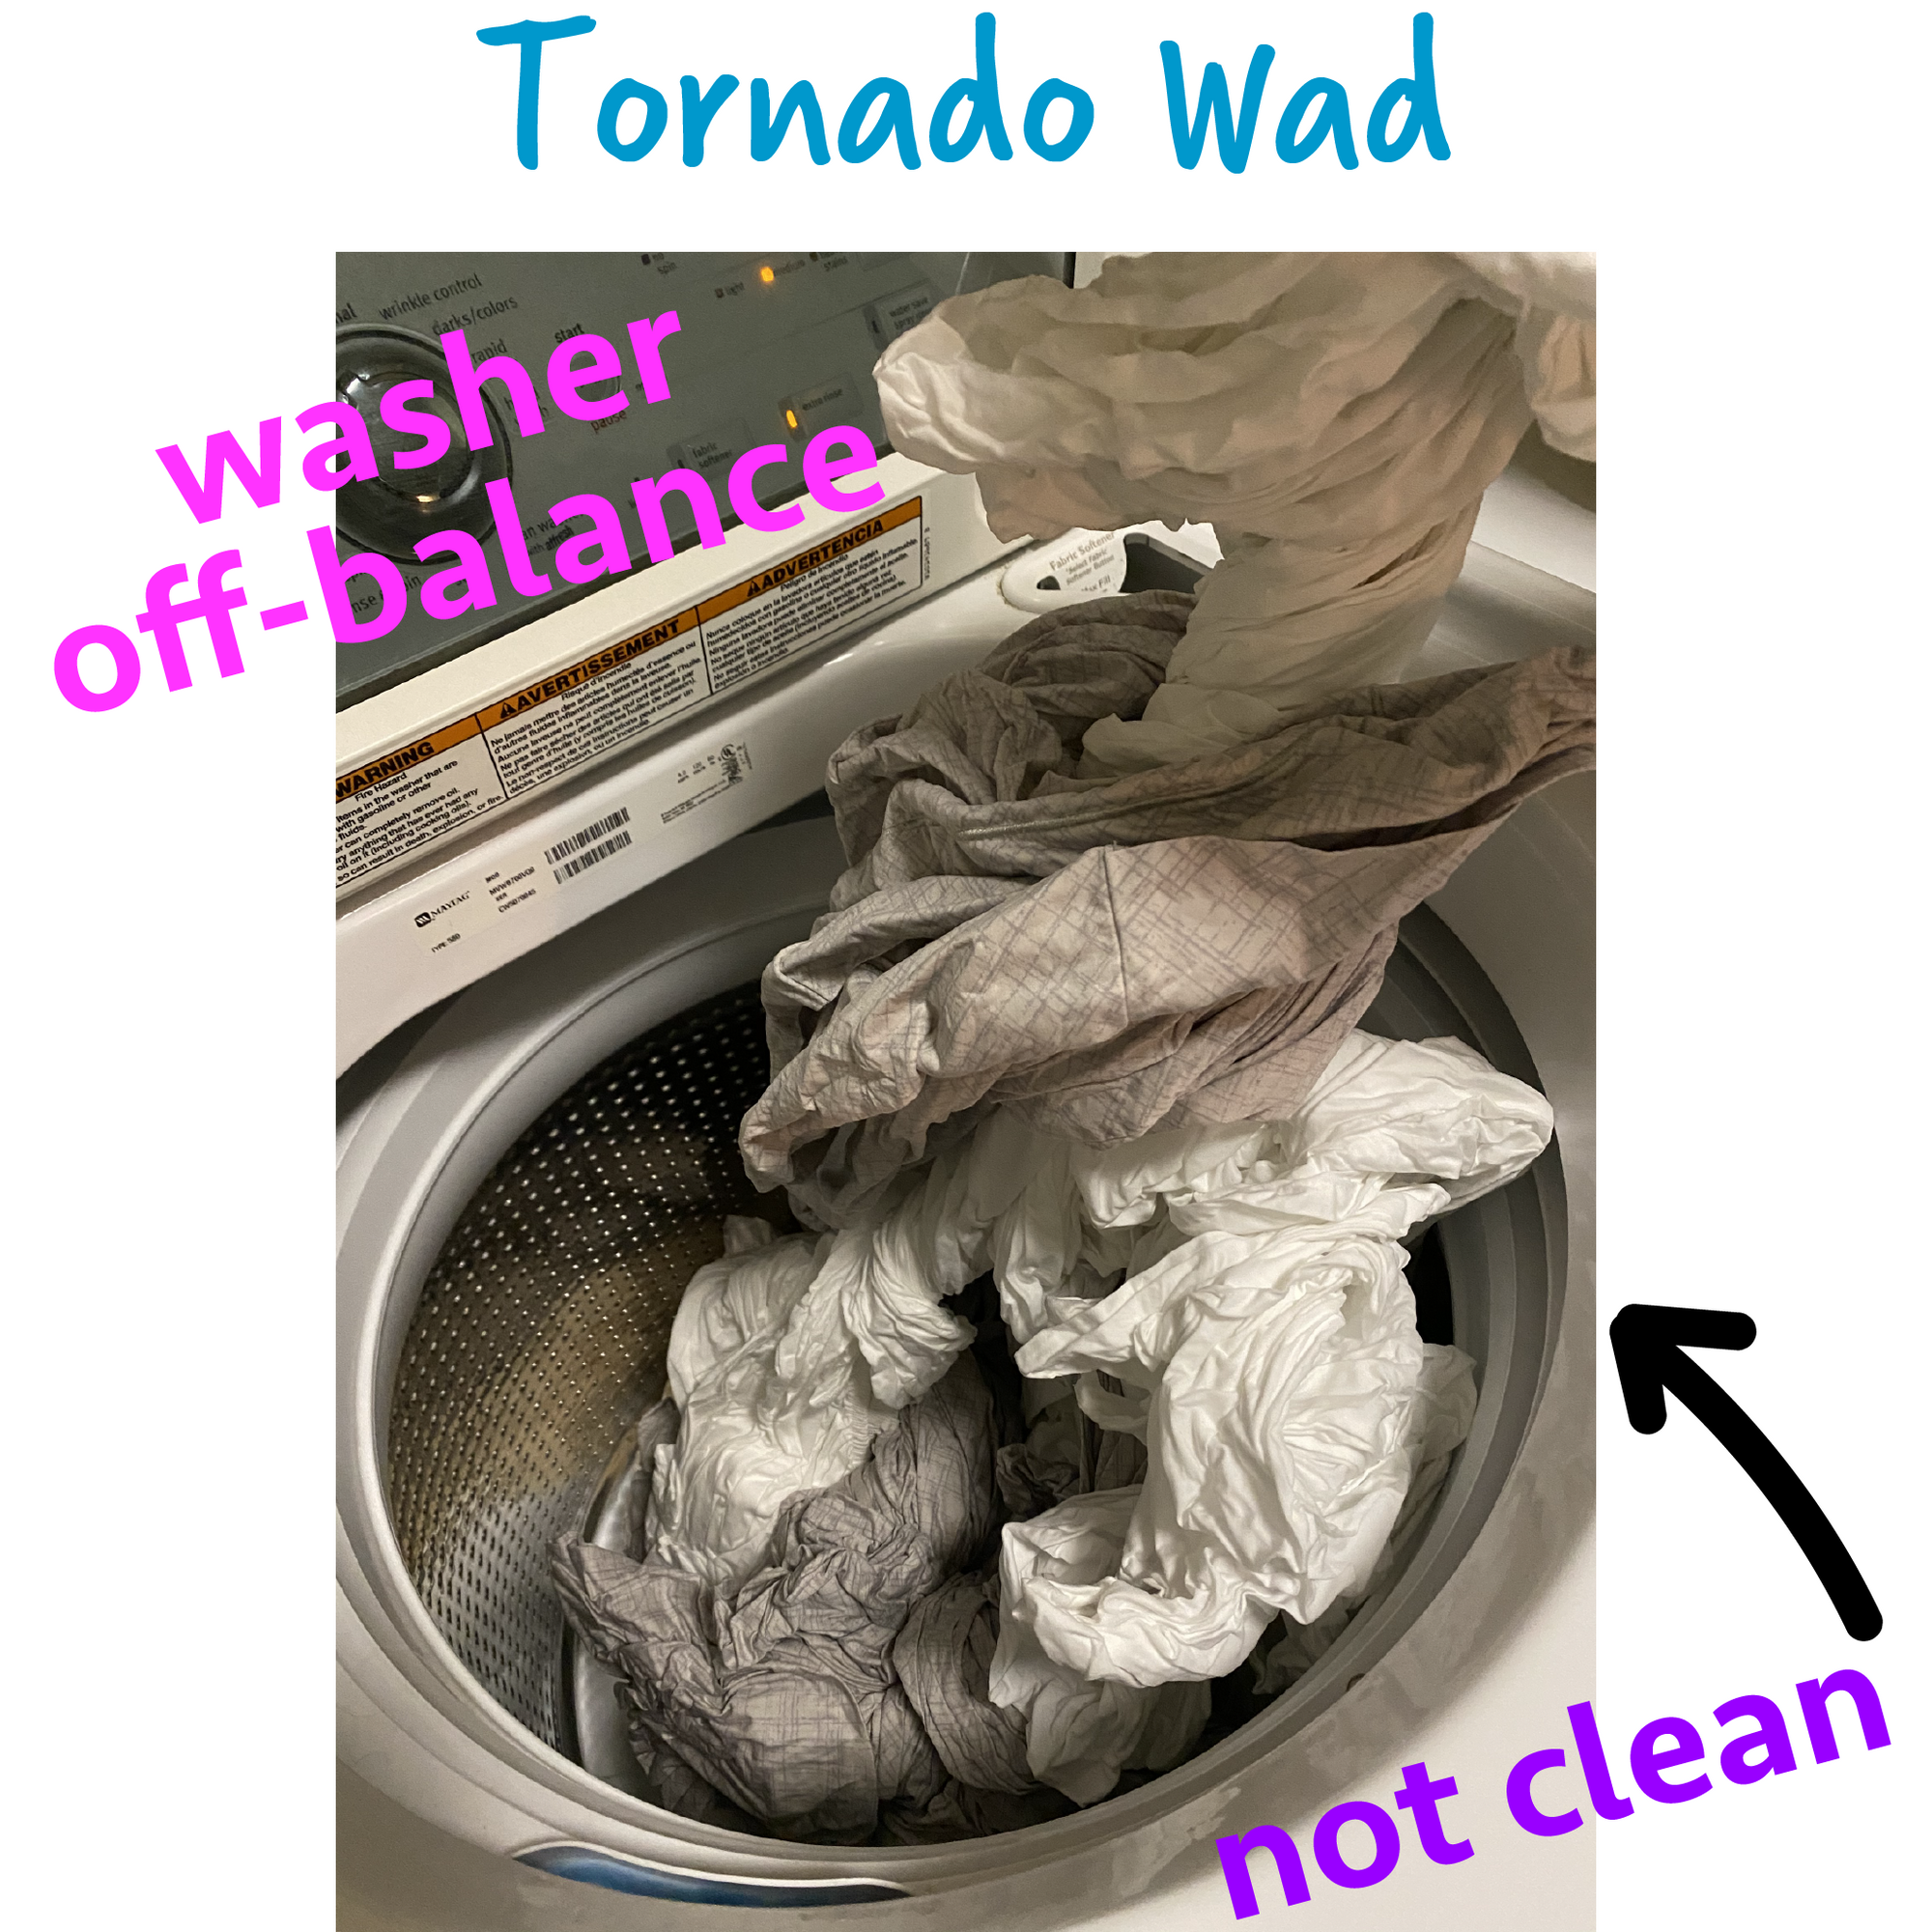 Wad-Free solves the Tornado Wad of twisted sheets intertwined and twisted coming out of a washing machine